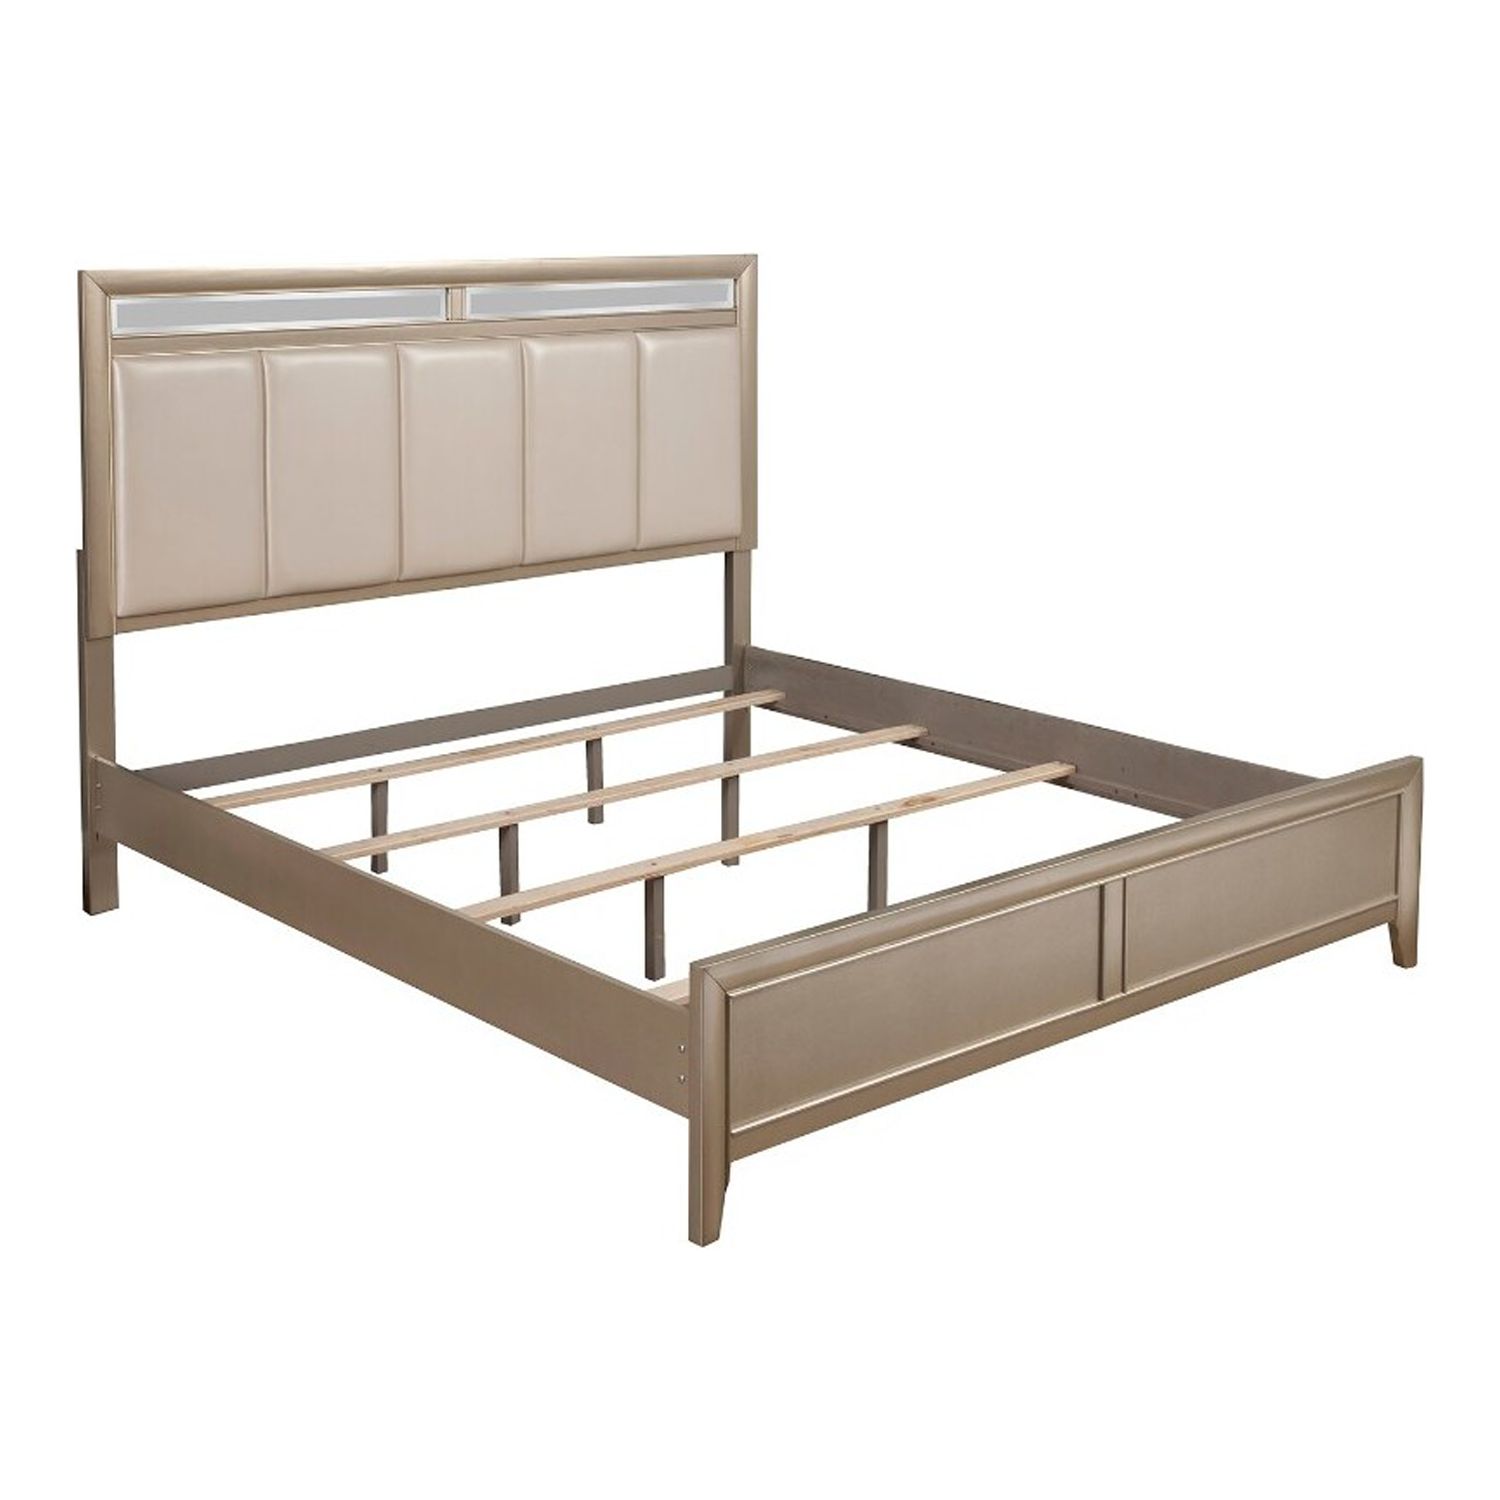 BenJara Pine Wood Queen Size Panel Bed With Upholstered Headboard, Silver - image 3 of 3